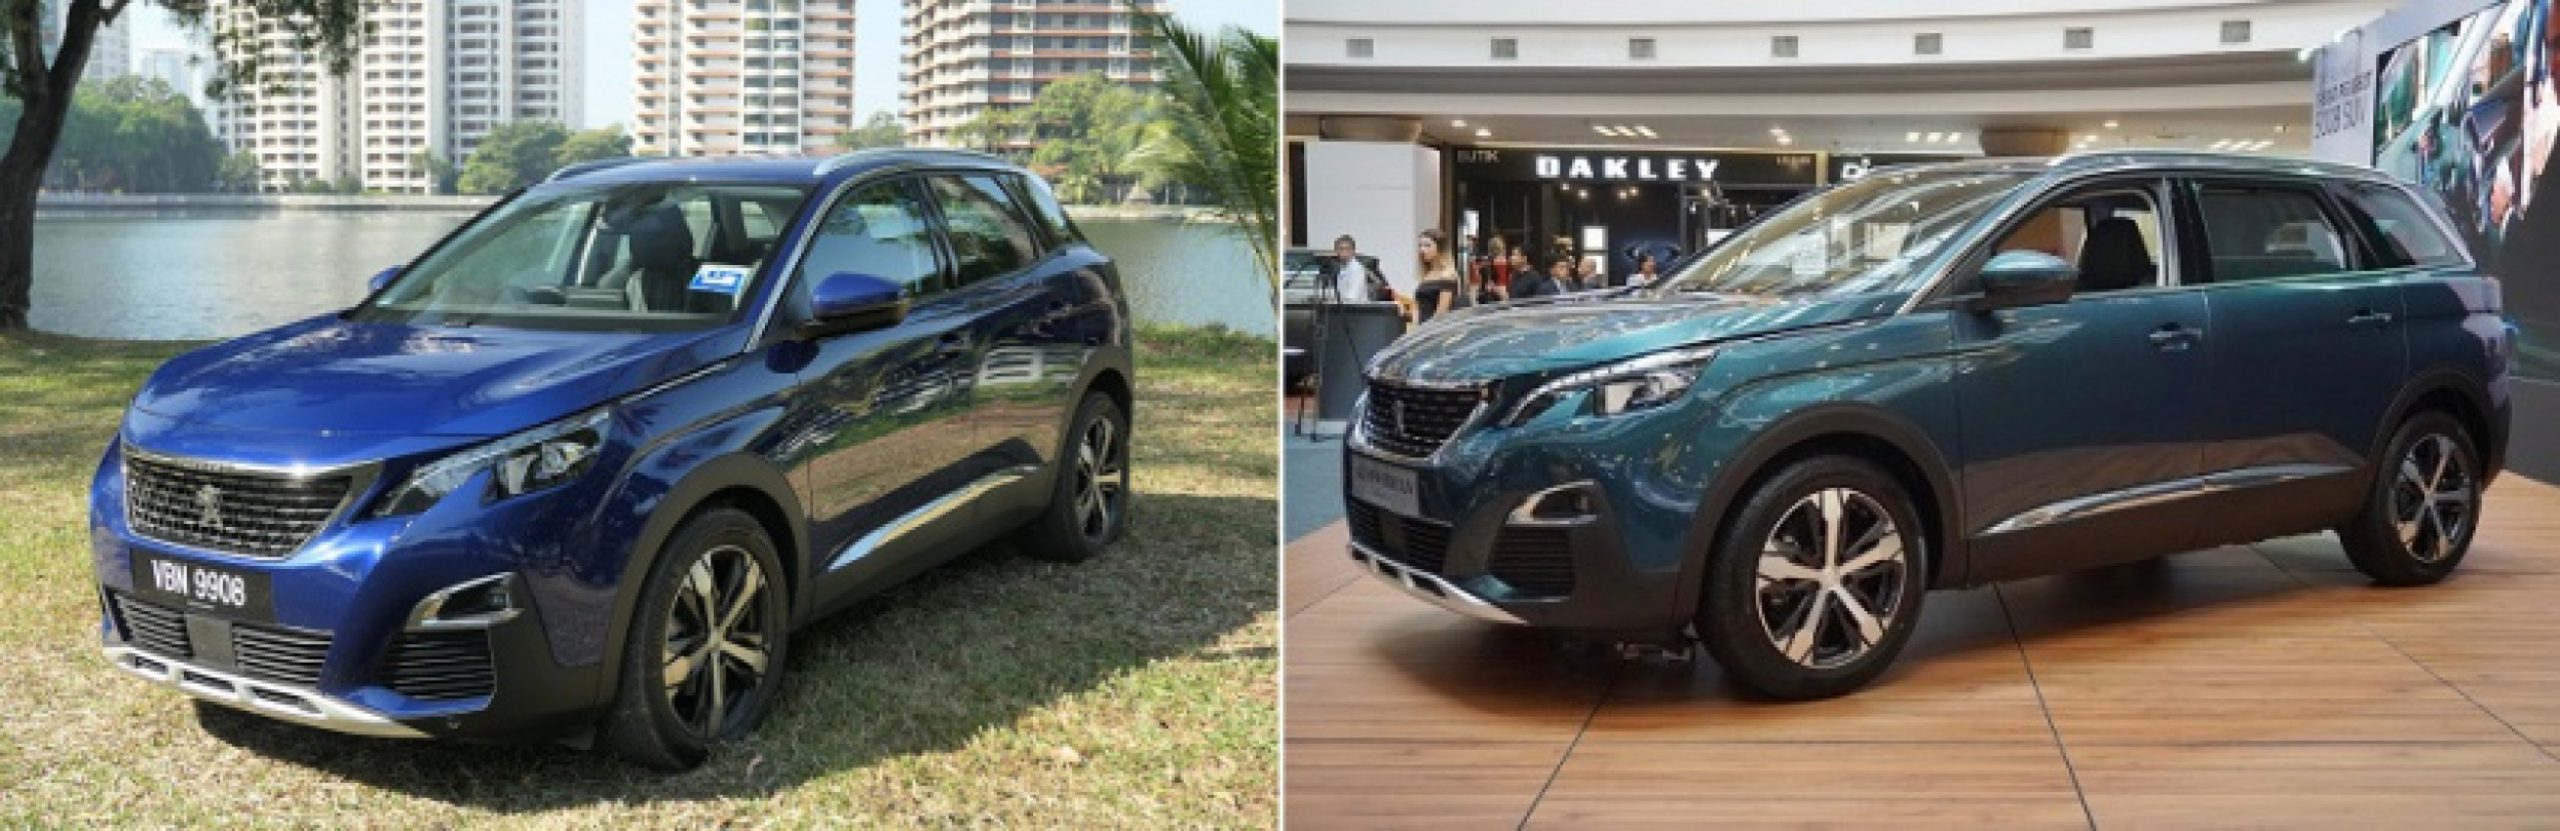 autos, cars, geo, peugeot, asean free trade area agreement, groupe psa, manufacturing, naza automotive manufacturing, peugeot 3008, peugeot 5008, regional production hub, groupe psa starts peugeot vehicle exports from naza automotive manufacturing, its production hub for asean